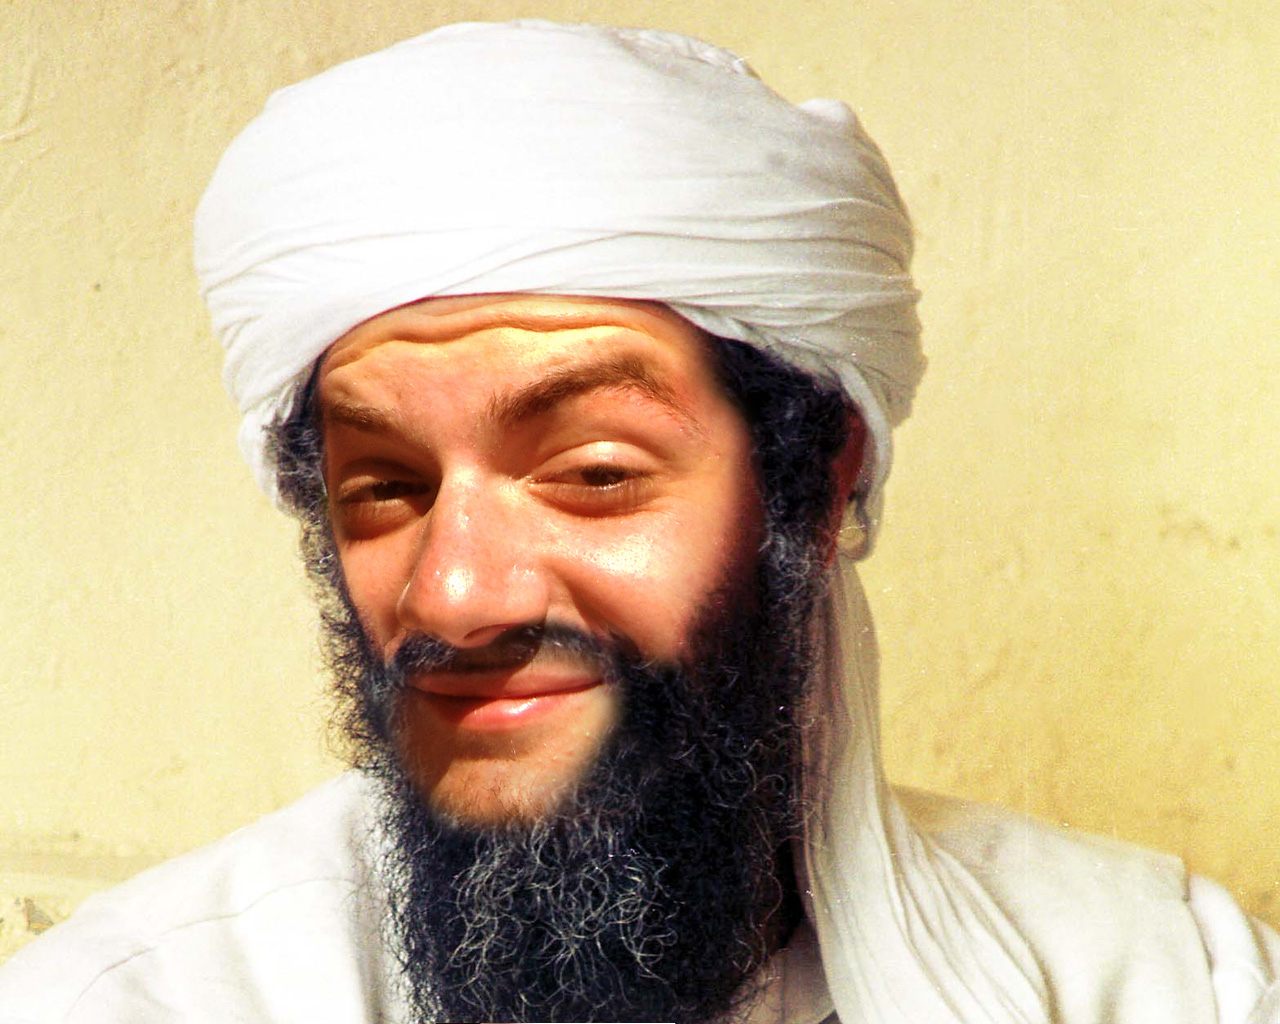 a man with a beard, wearing white, wearing a head scarf